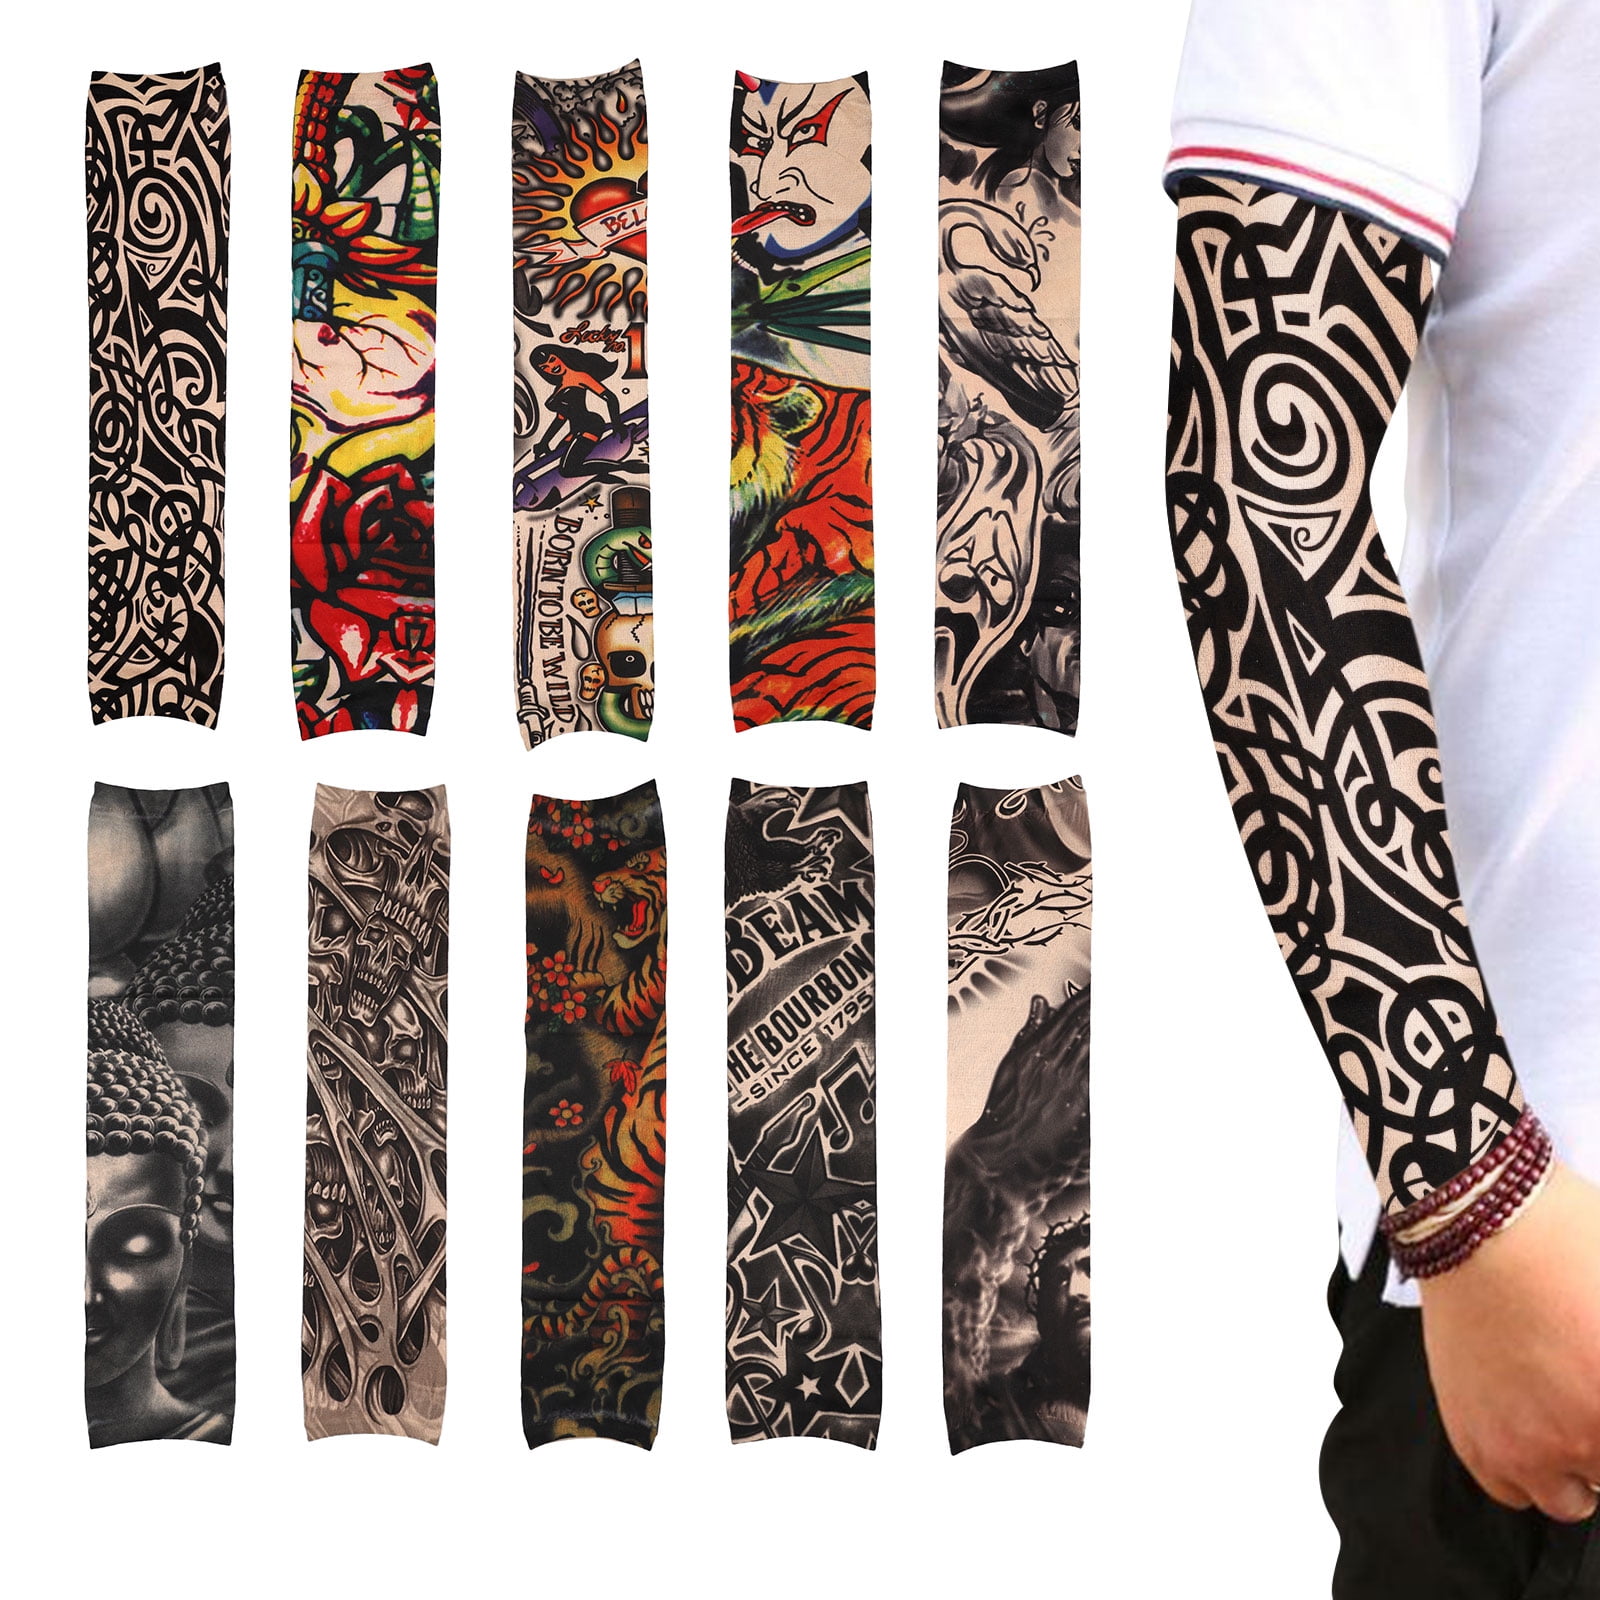 CaMoloMaC UV Protection Cooling Arm Sleeves for Men Women Kids Long Tattoo Arm Cover Europe Albanian Flag Sun Protection Sunblock Cooler Basketball Protective Gloves Sunscreen 1 Pair 